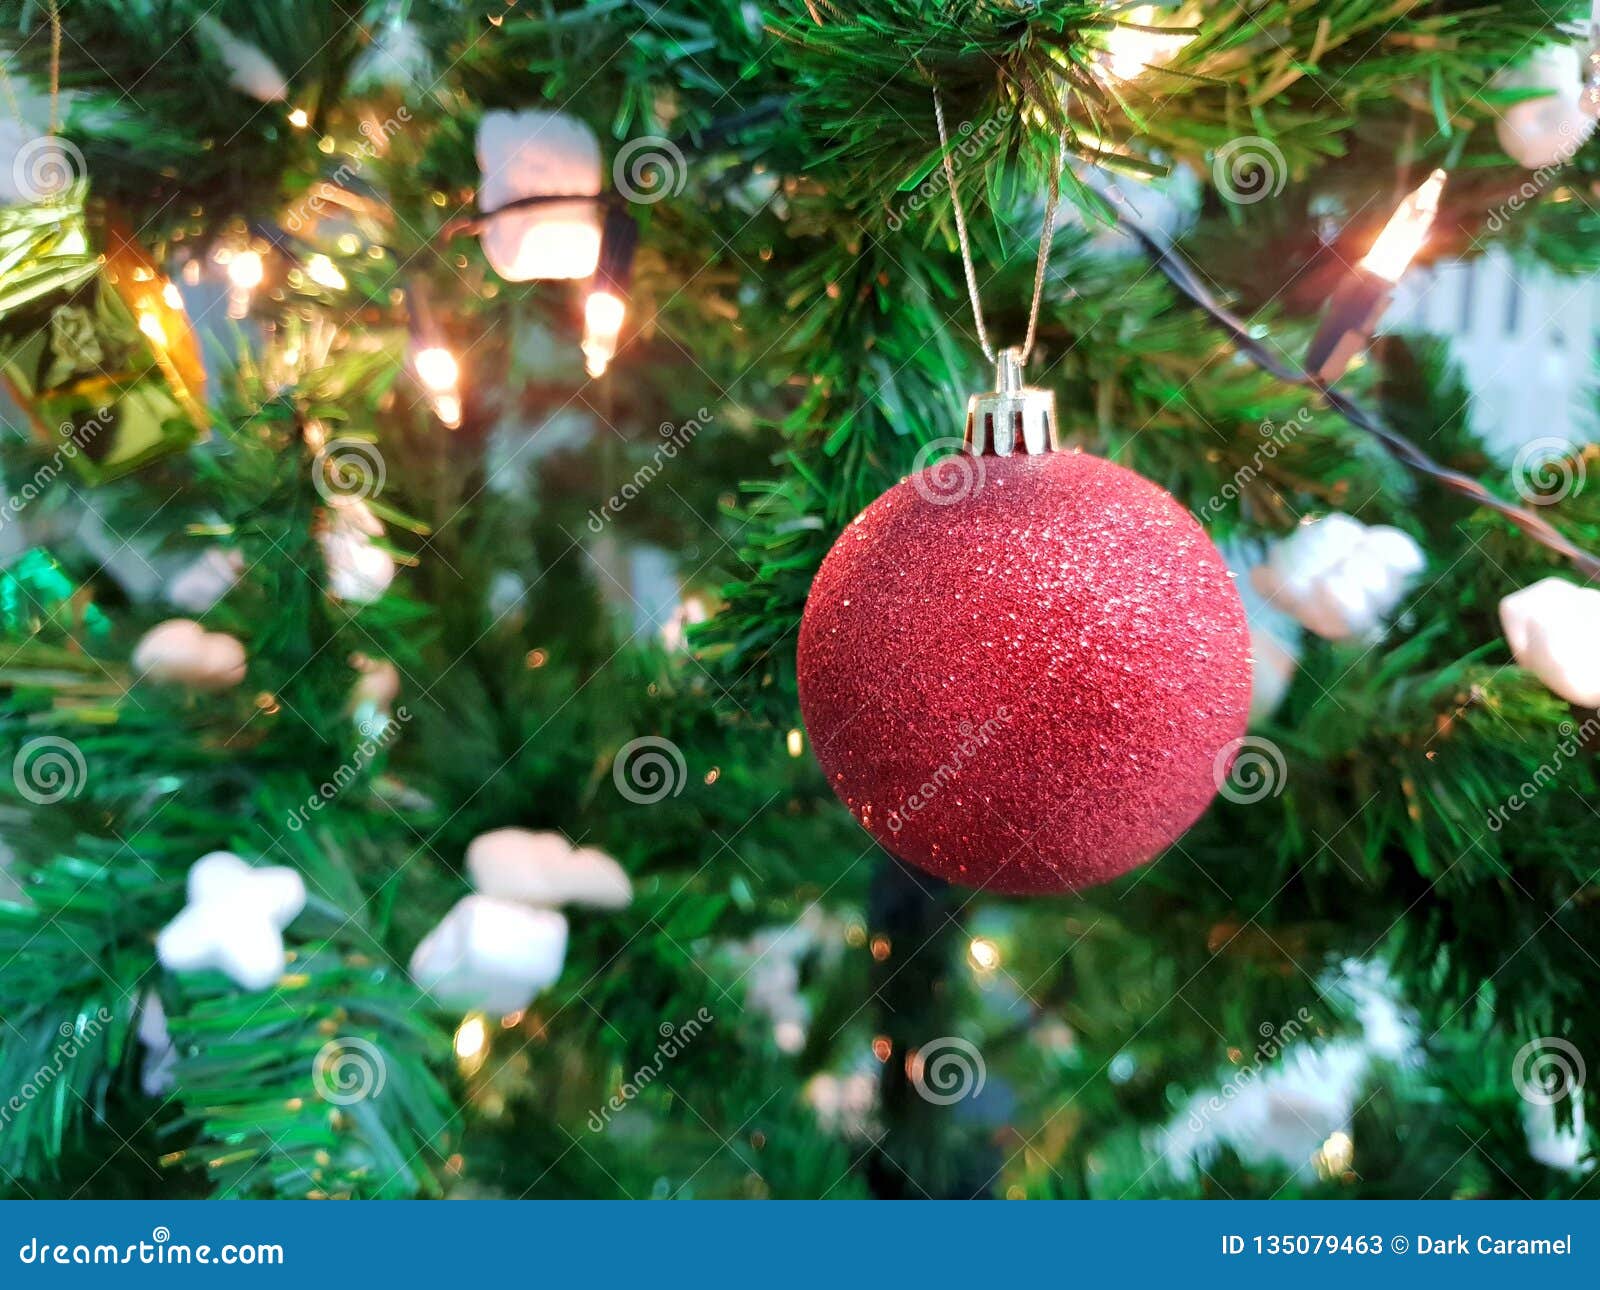 Decorated Christmas Tree with Red Ball. Stock Image - Image of green ...